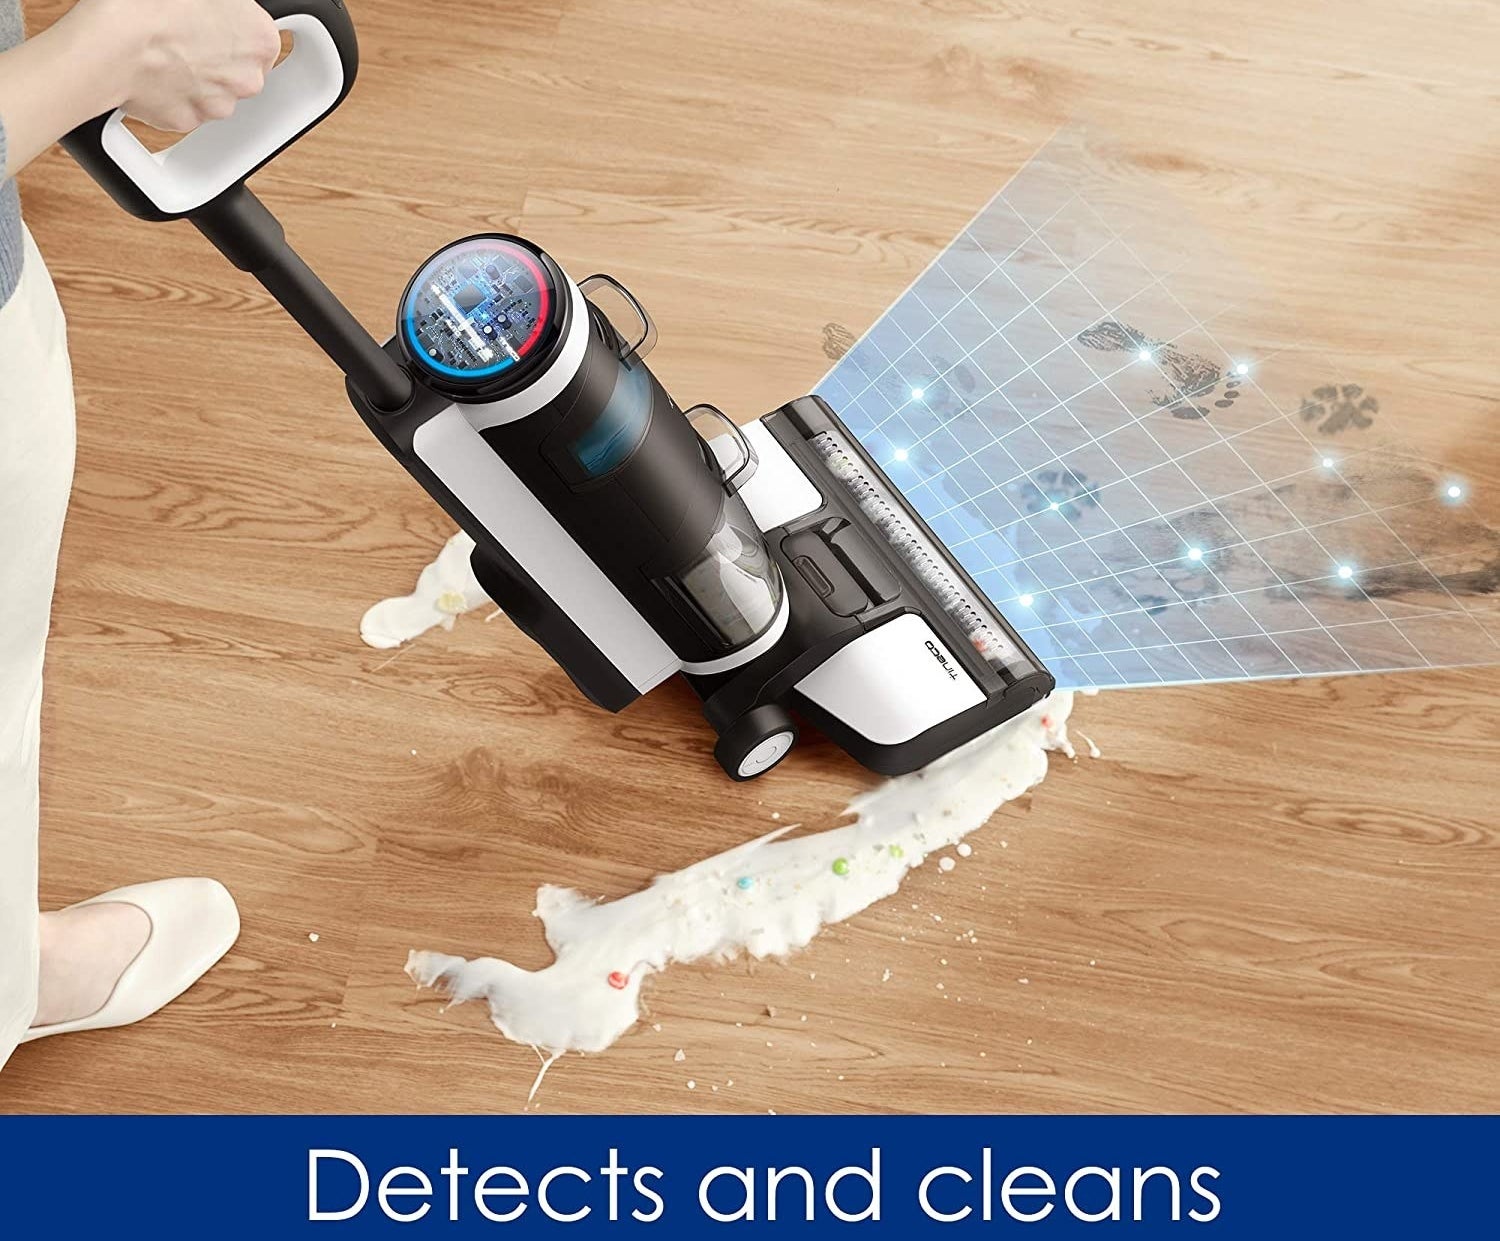 A person cleaning spilled cereal and muddy pawprints off a wooden floor with a vacuum